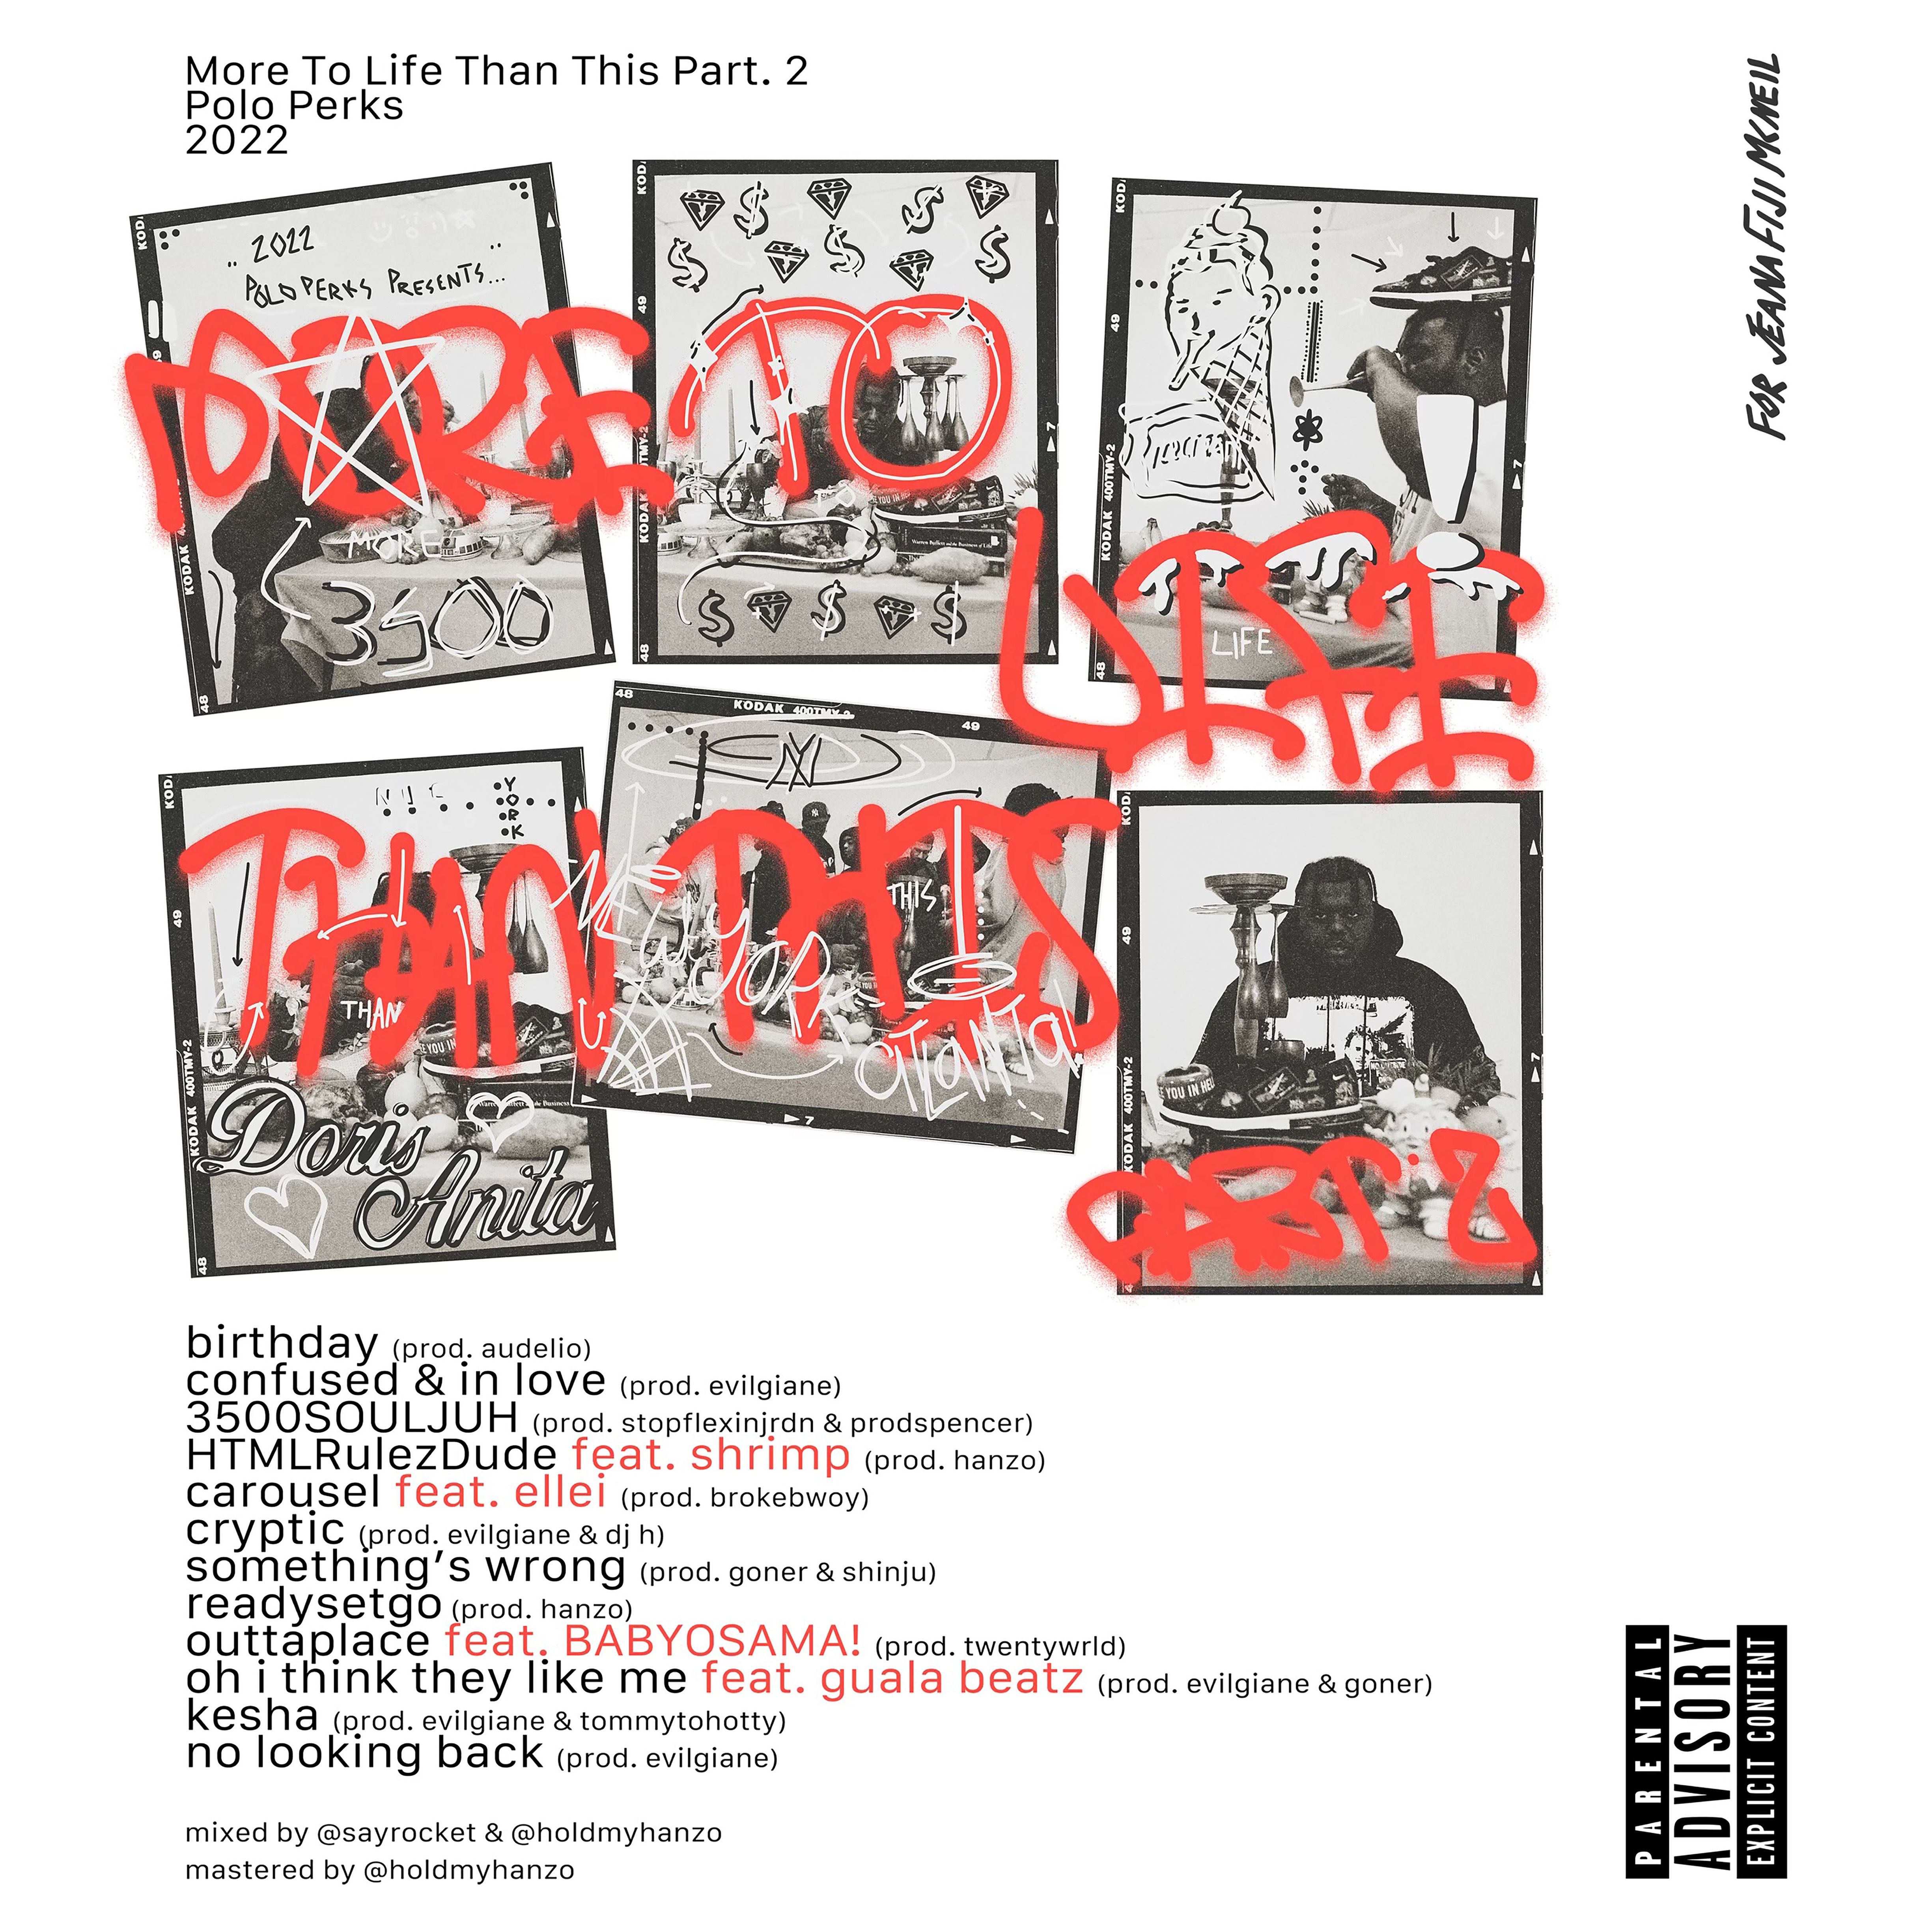 More to Life Than This Pt 2 by undefined back cover